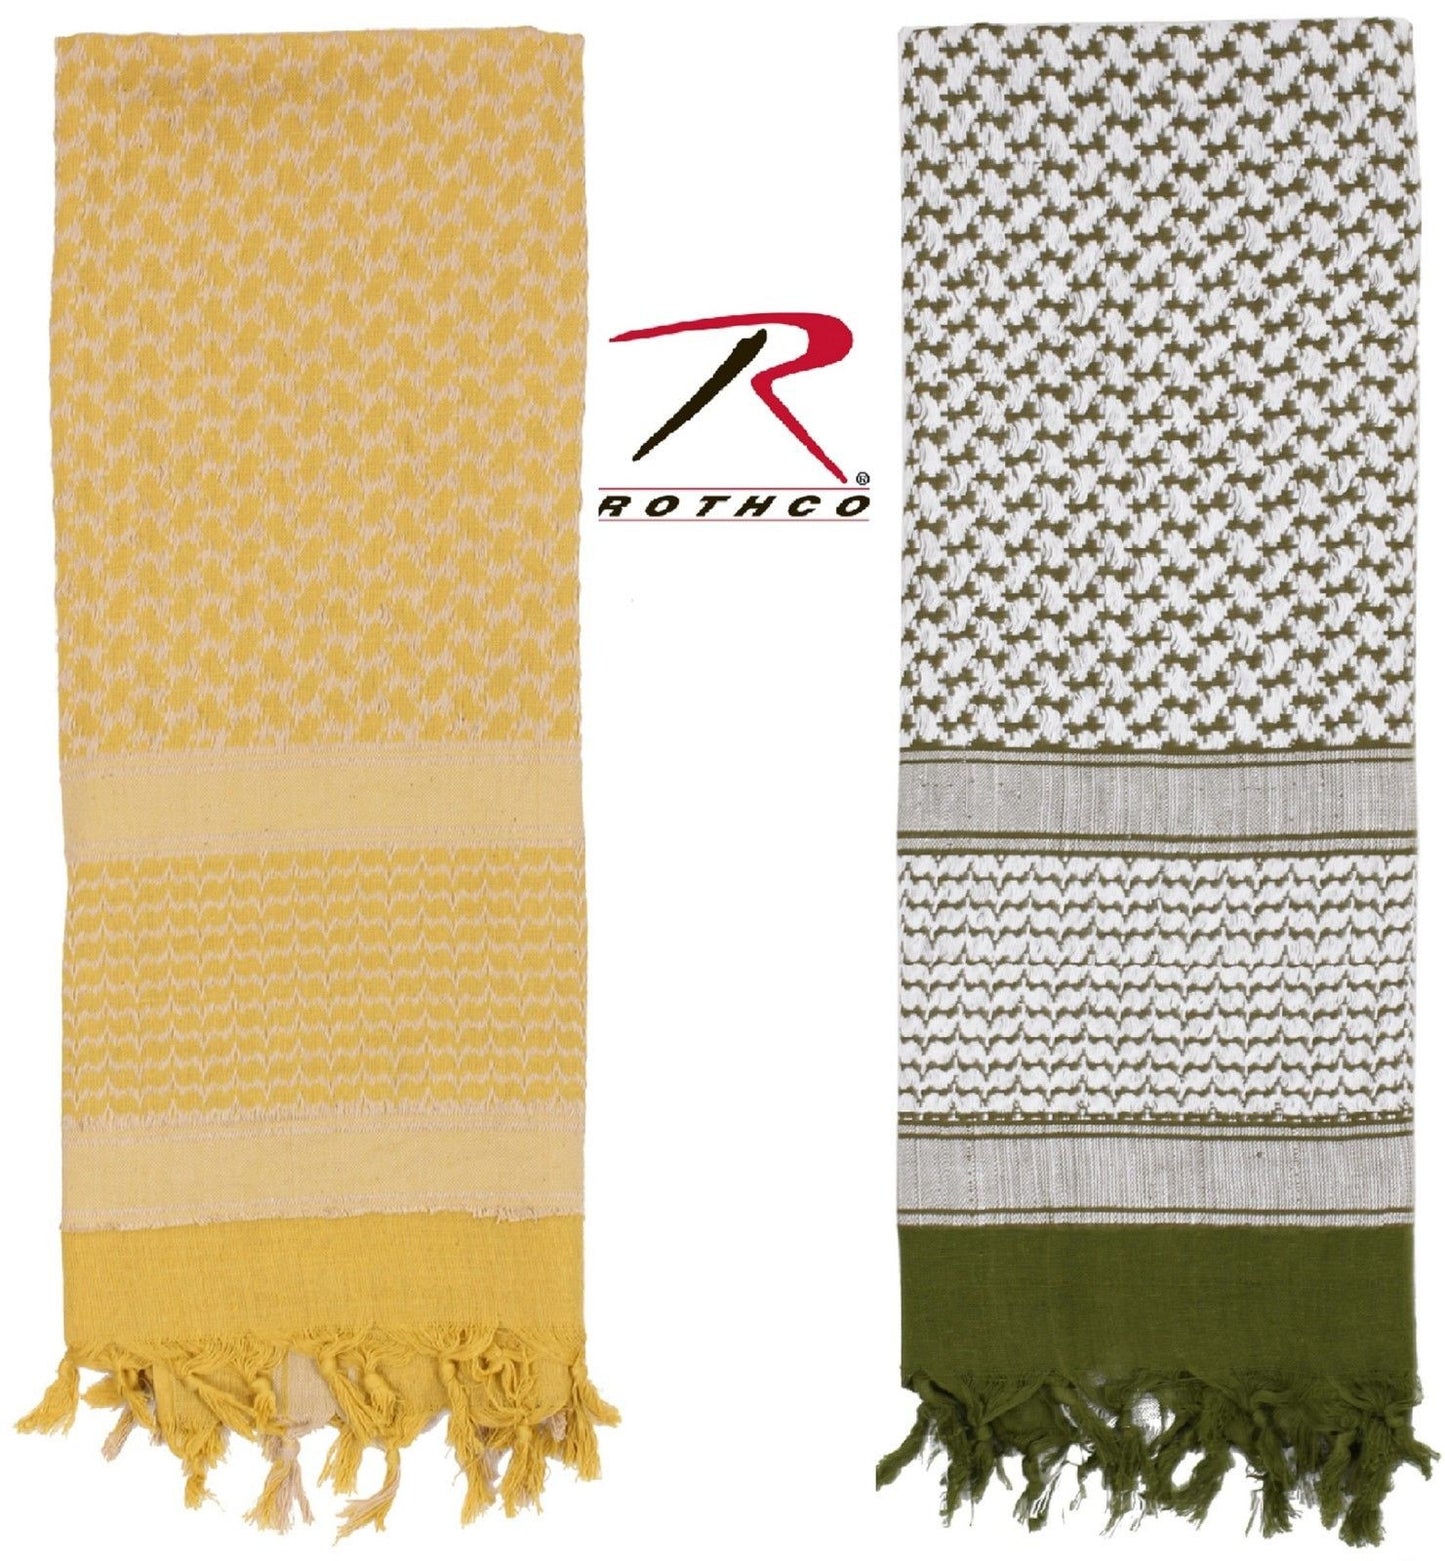 Rothco 100% Cotton Tactical Shemagh Desert Scarf - Sun Sand Head & Neck Scarves